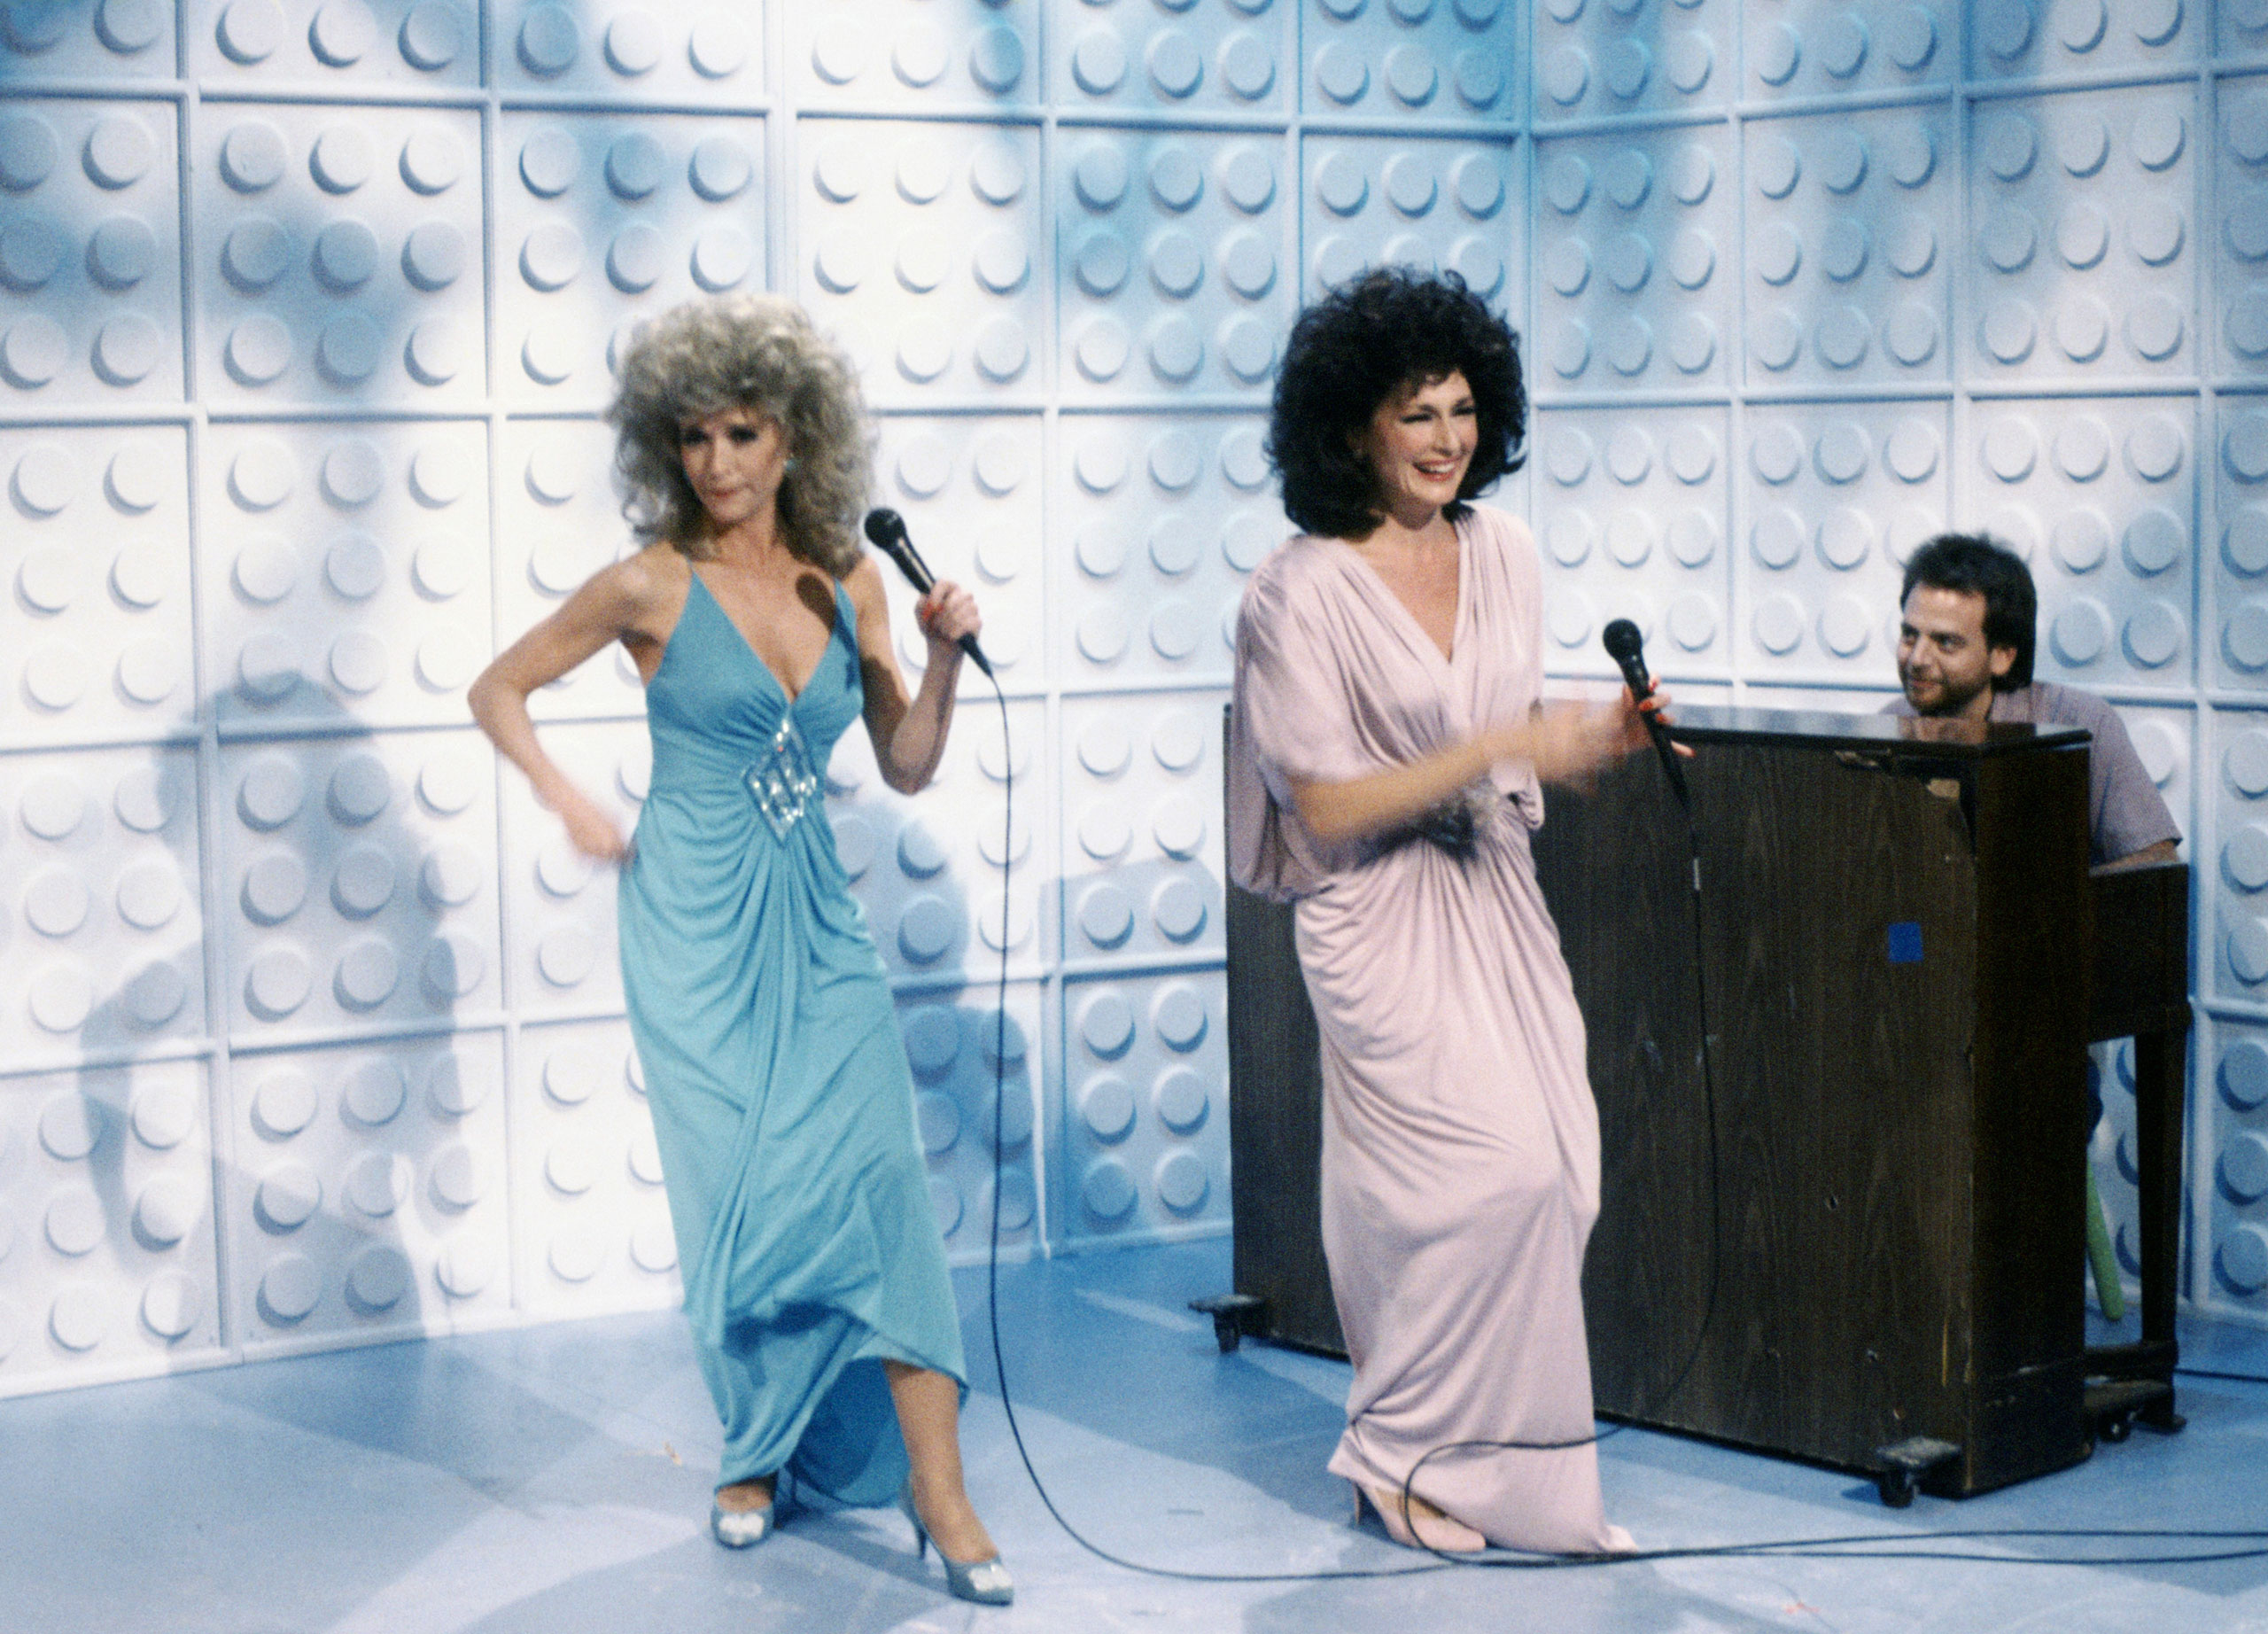 From left: Nora Dunn as Liz Sweeney, Jan Hooks as Candy Sweeney and Marc Shaiman as Skip St. Thomas during the Instant Coffee skit on Oct. 18, 1986. (NBC/Getty Images)